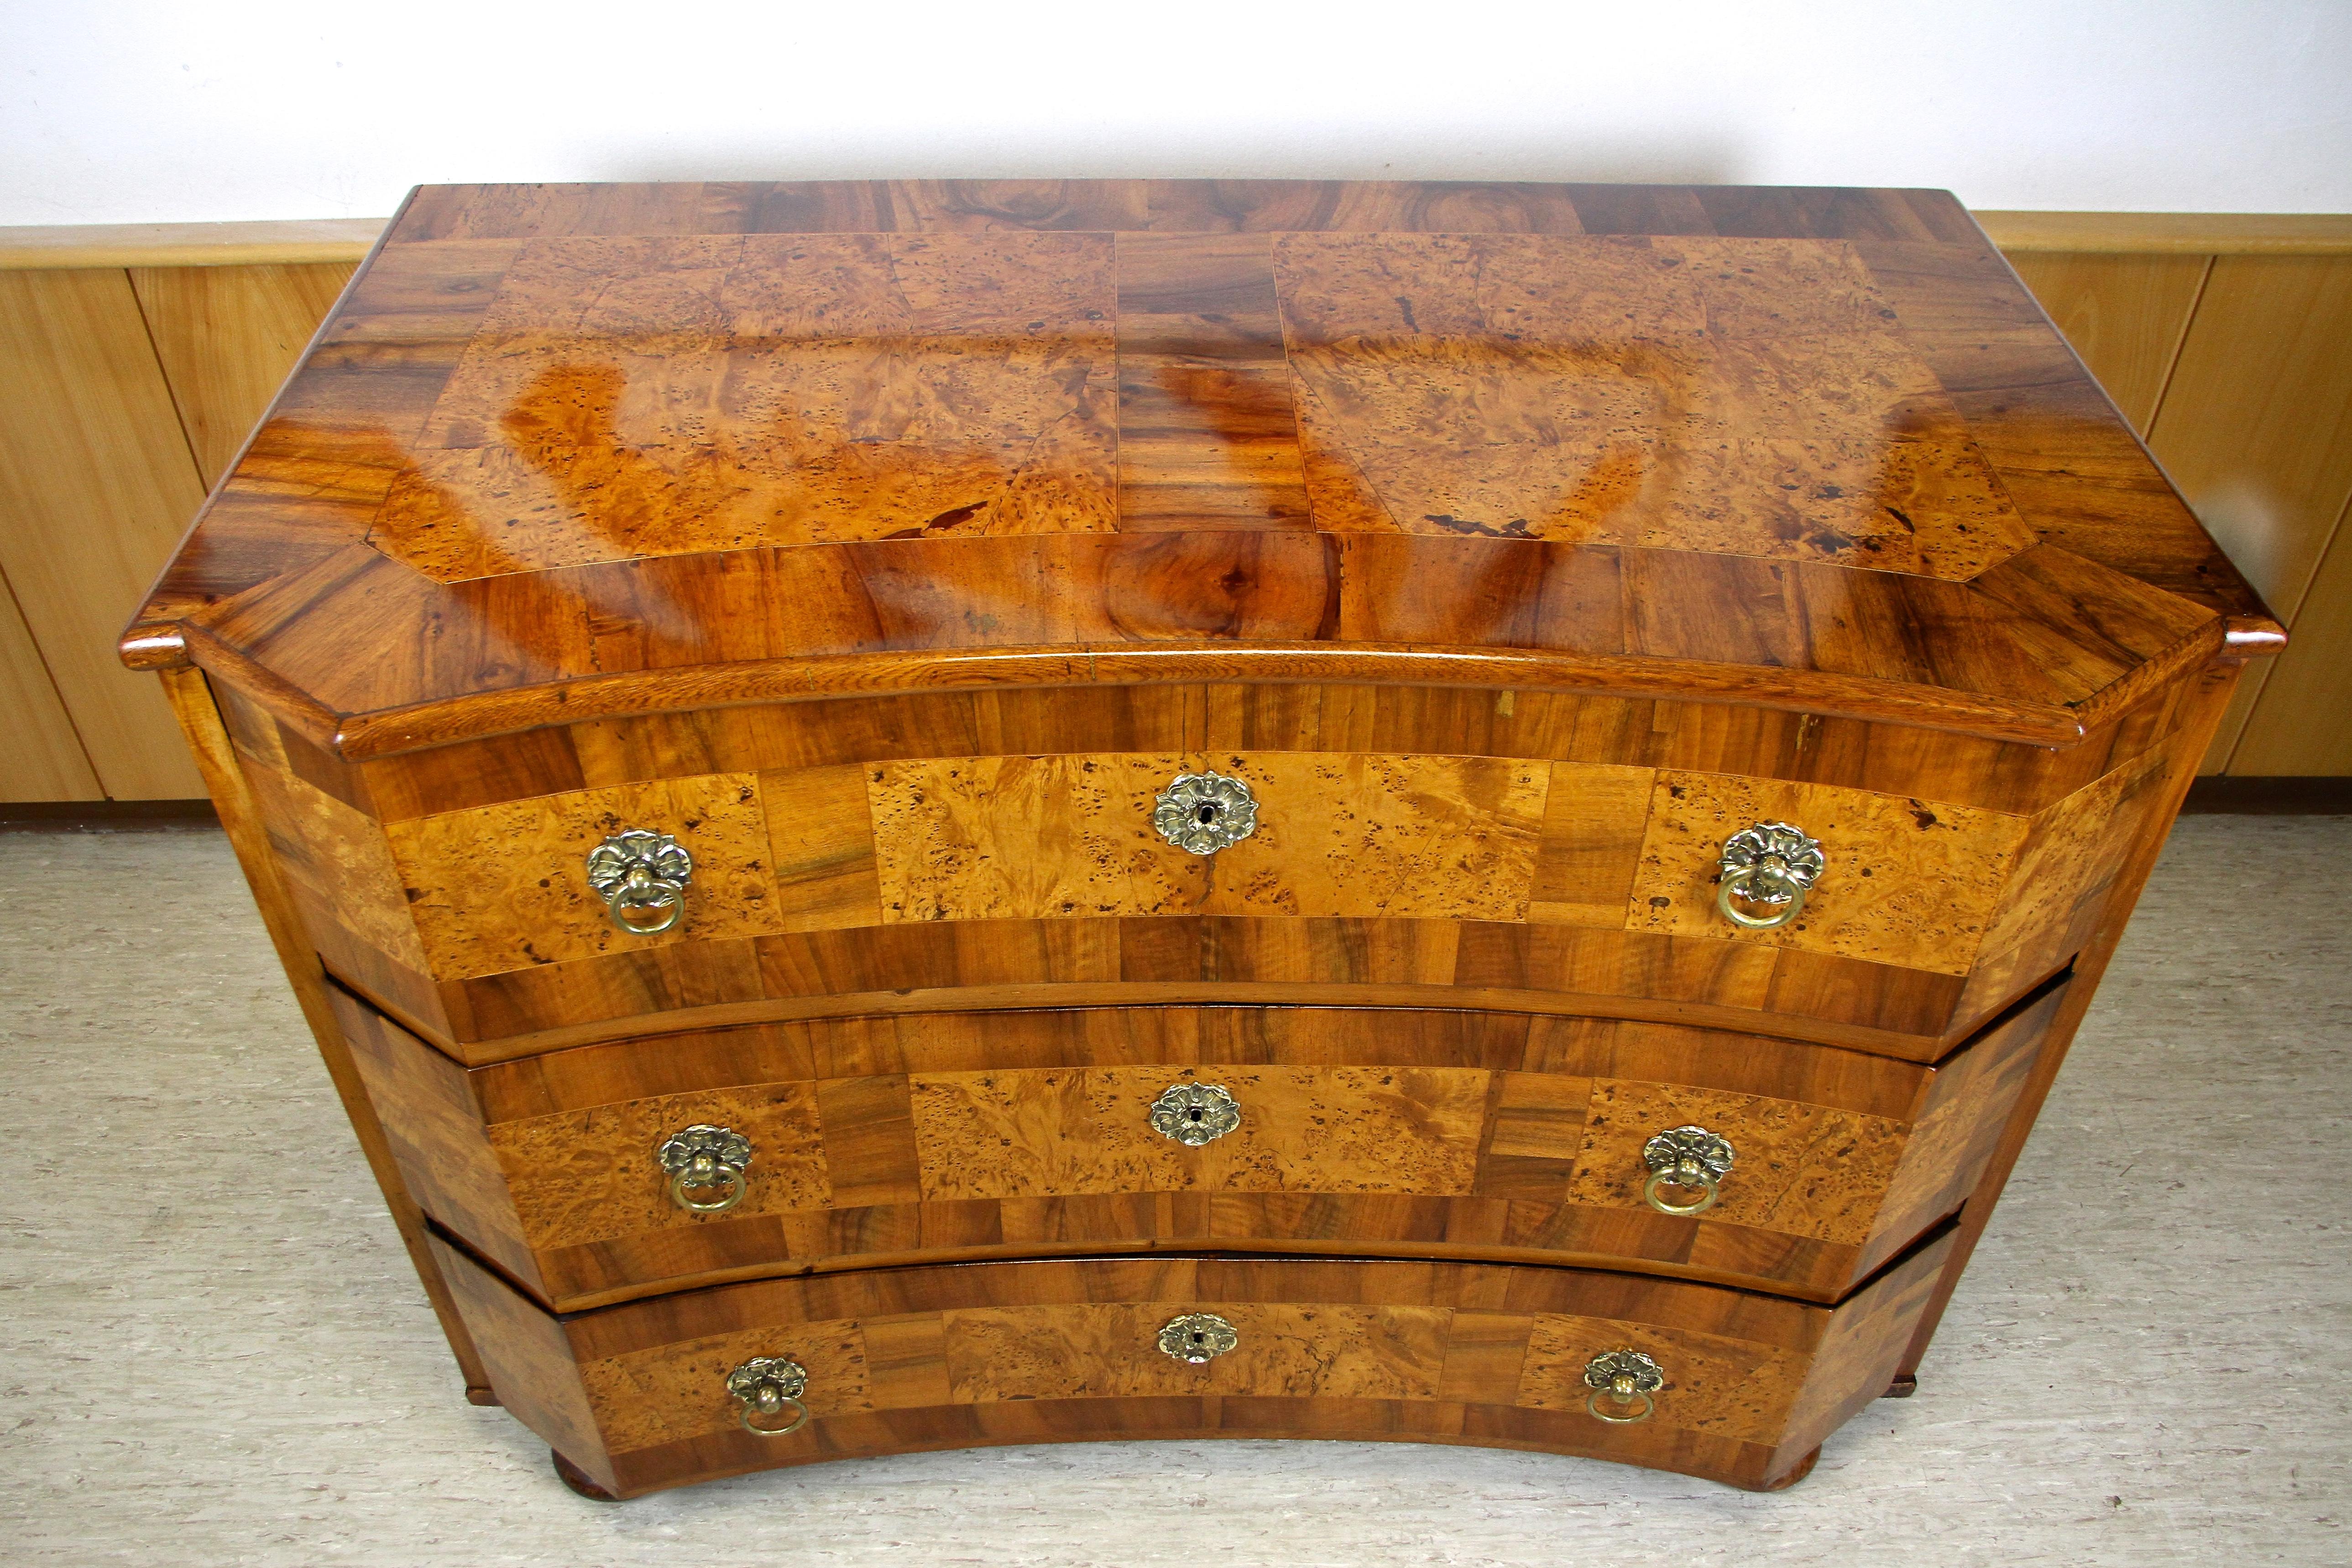 Outstanding 18th century chest of drawers made in the Baroque period in Austria around 1760. This unique baroque chest, coming from a manorial household, impresses with an amazing curved shape and beautiful set nutwood and birds eye maple veneer on